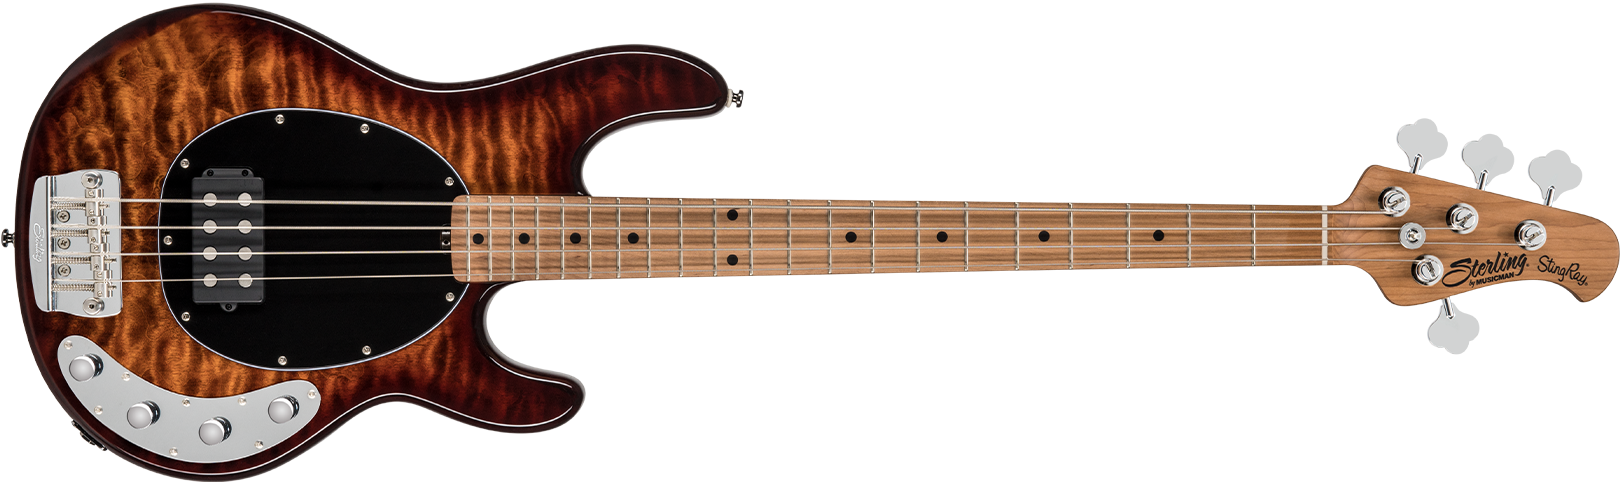 The StingRay RAY34QM bass in Island Burst front details.